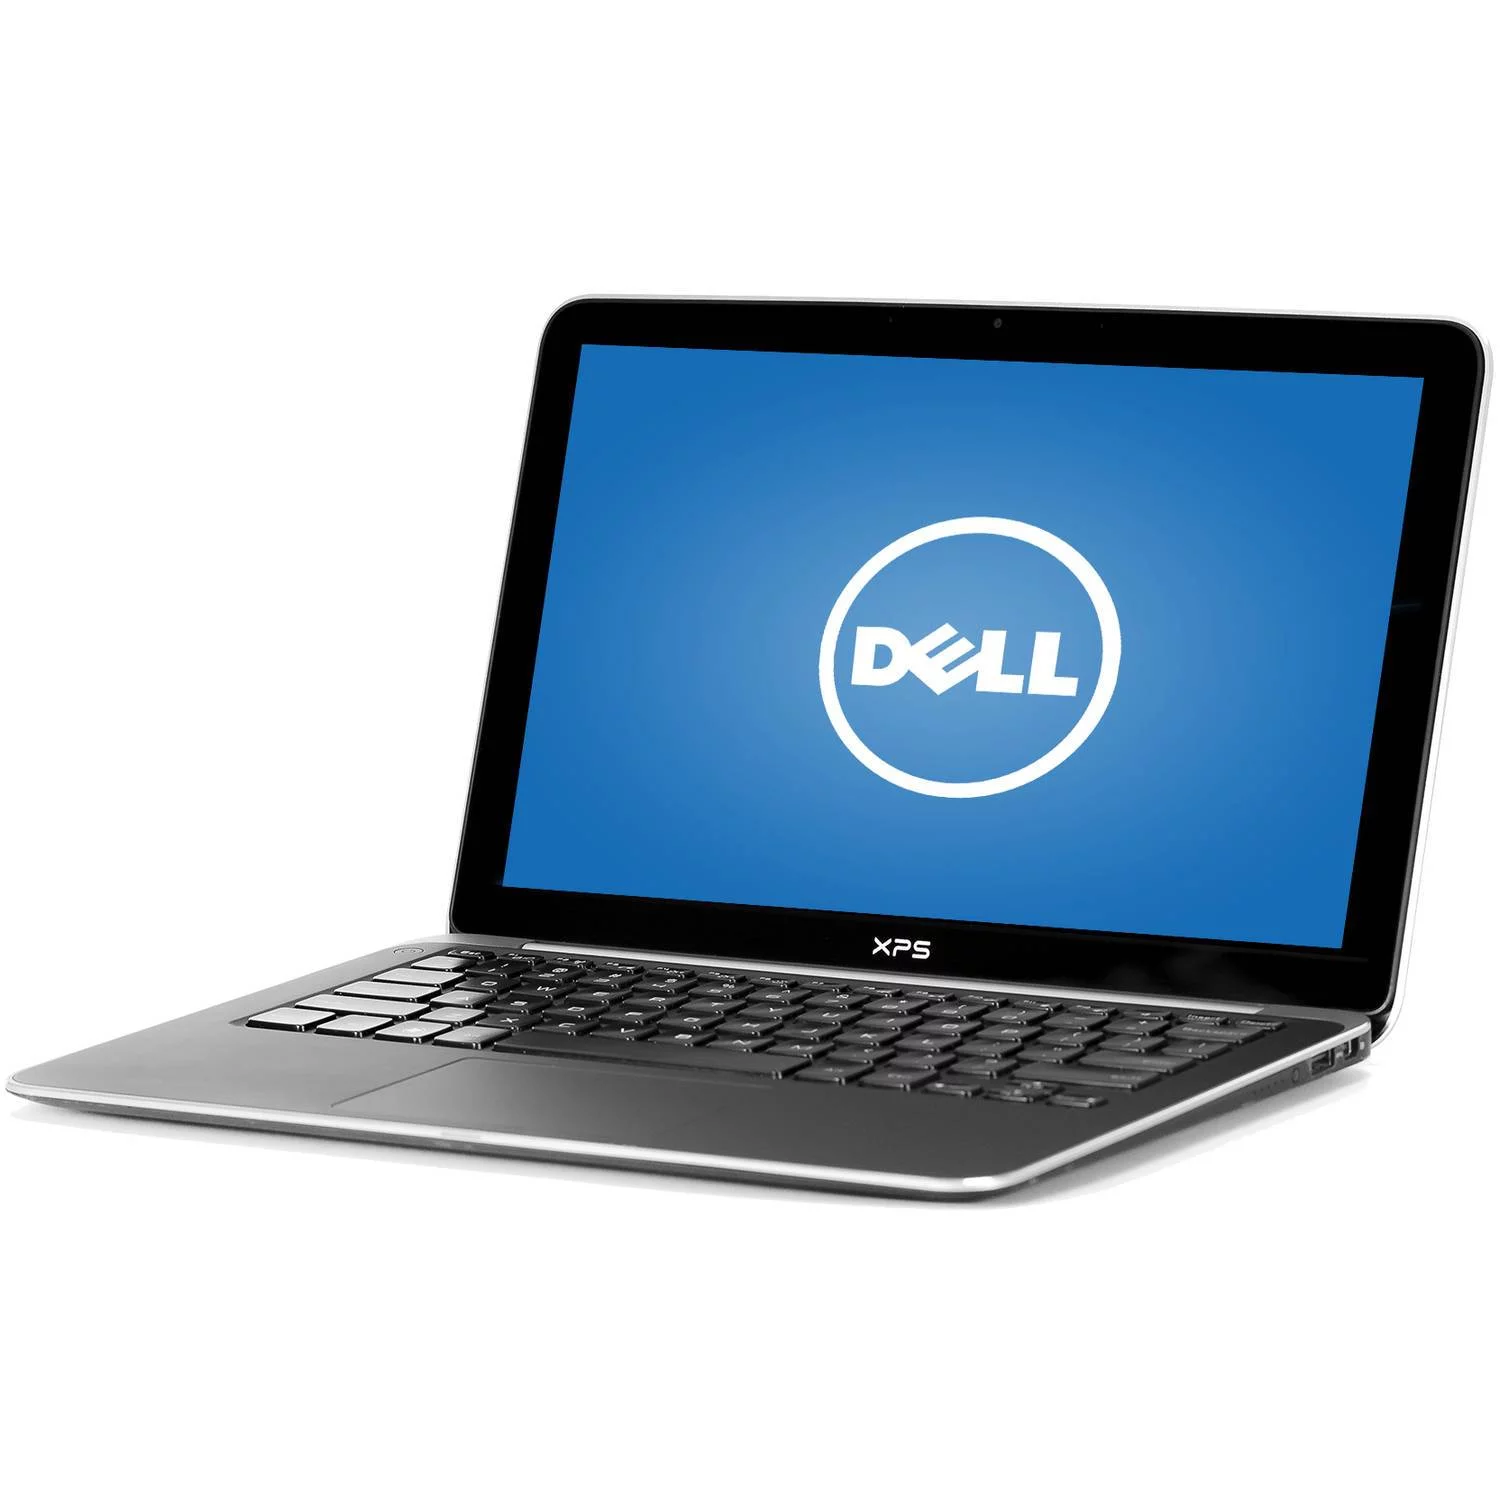 Dell XPS L321X Notebook